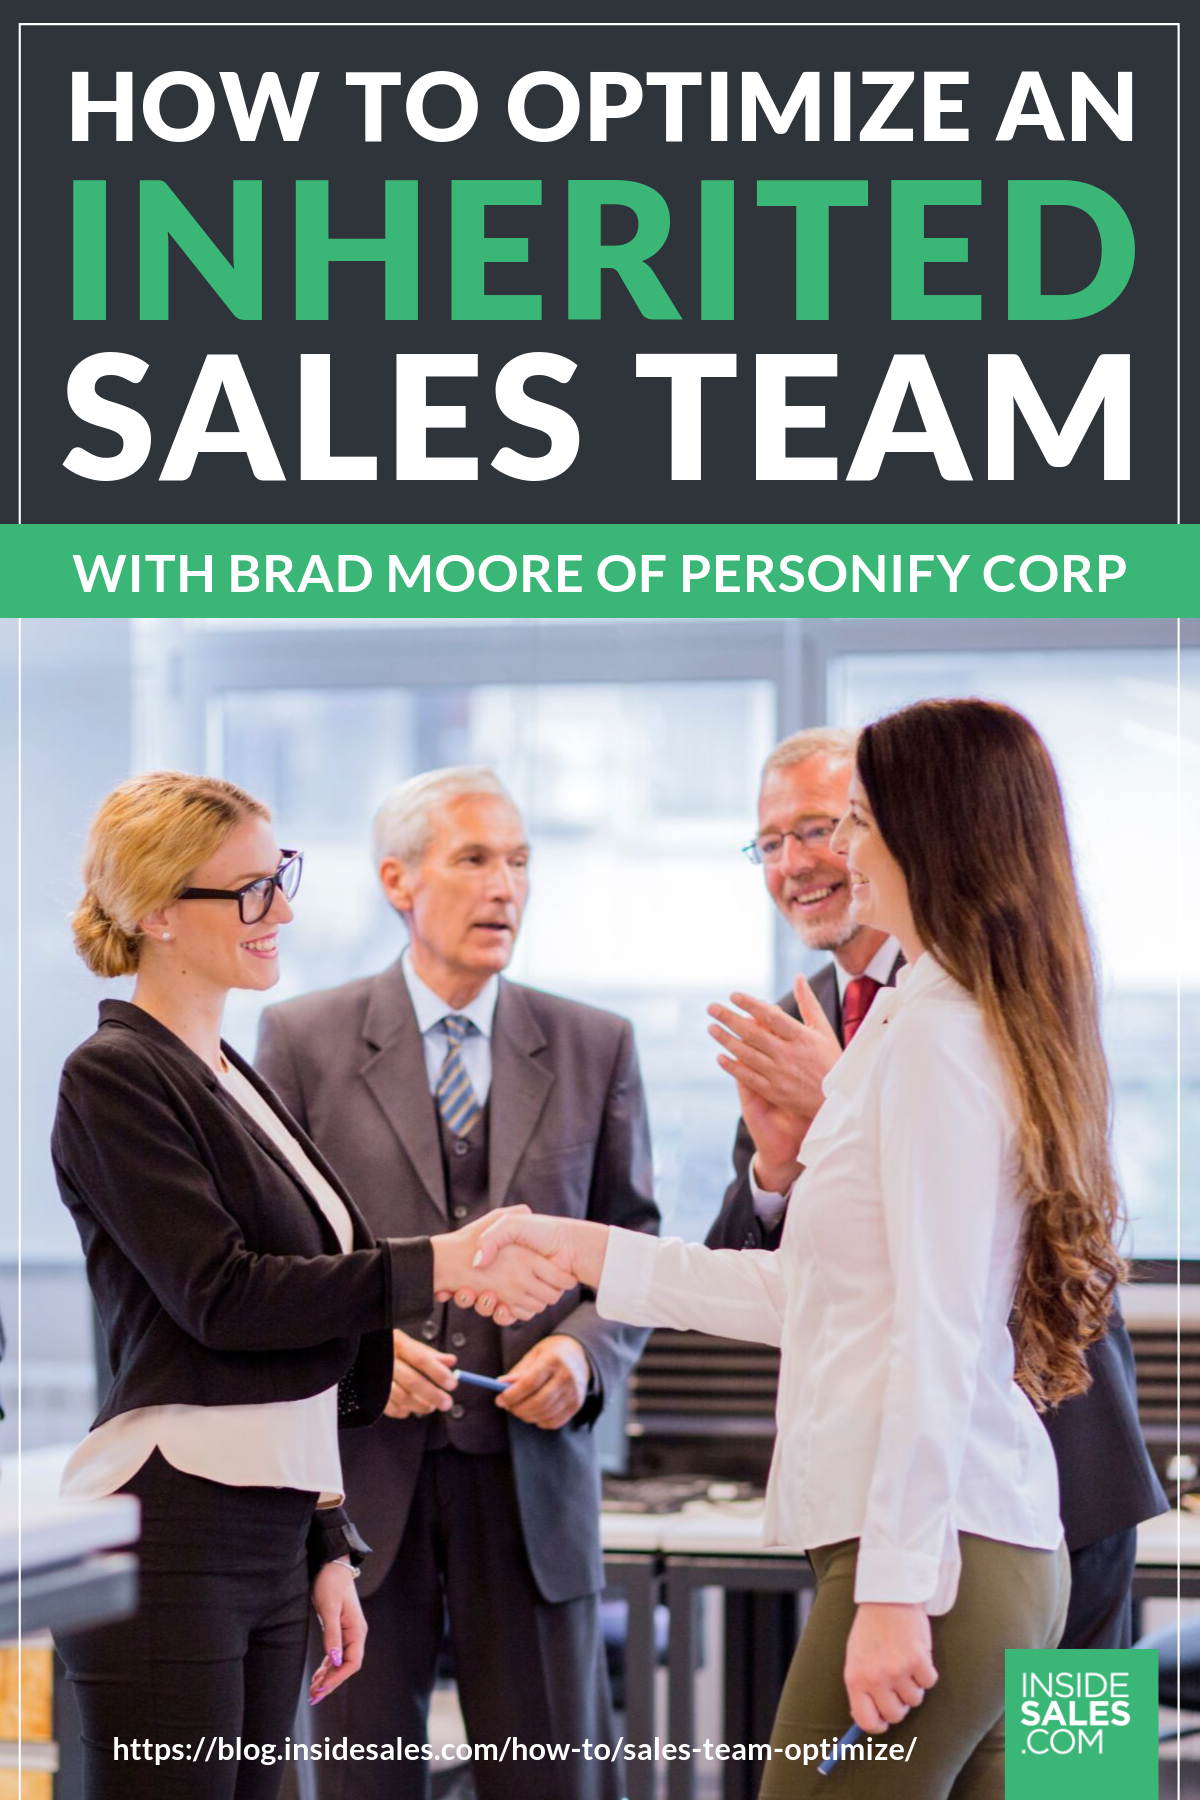 How To Optimize An Inherited Sales Team w/Brad Moore @PersonifyCorp https://resources.insidesales.com/blog/how-to/sales-team-optimize/